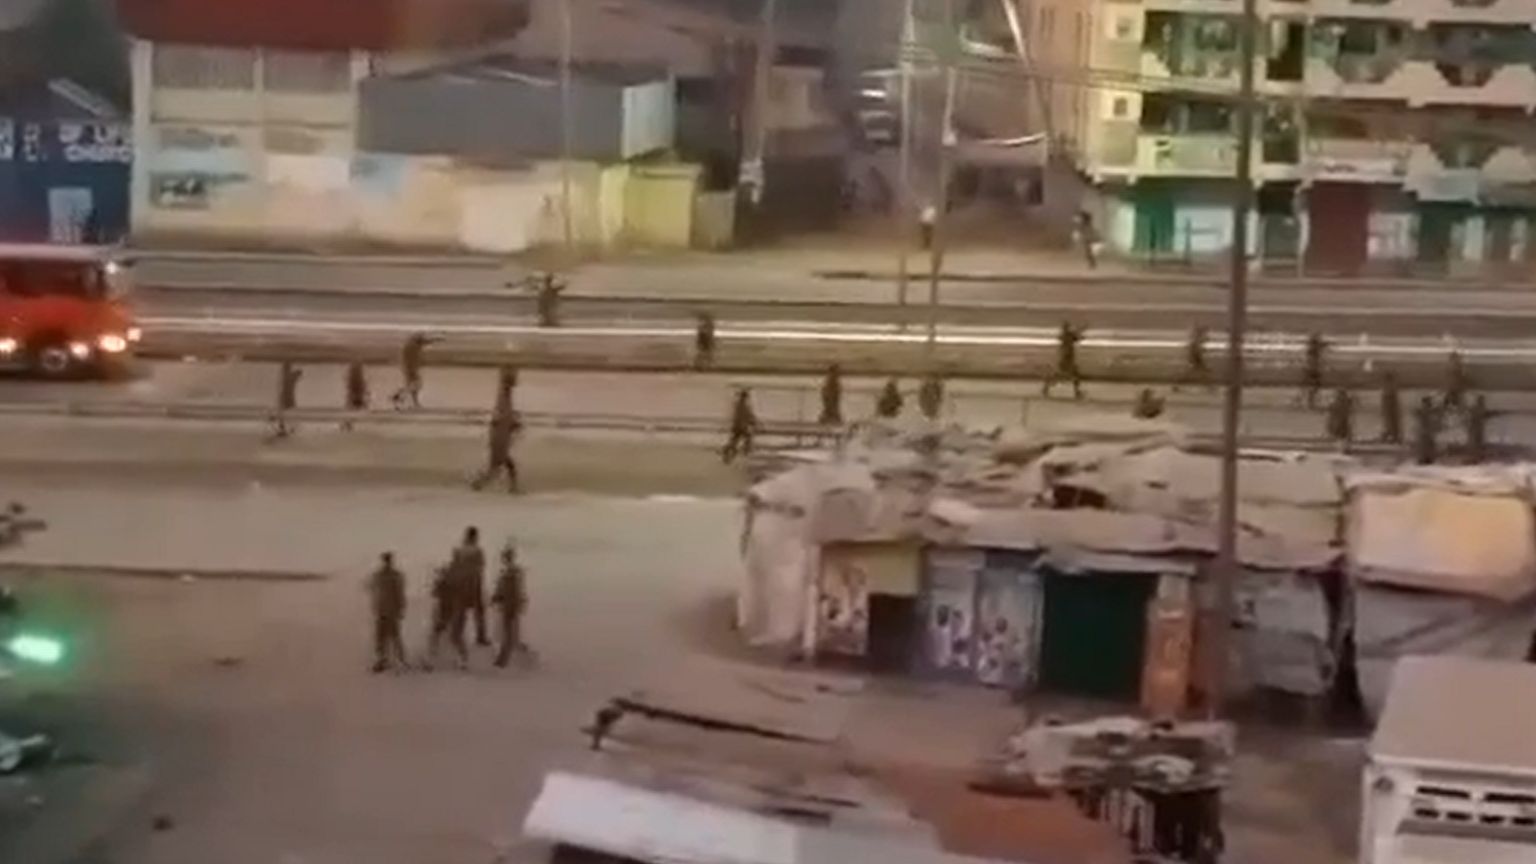 A still from a video showing securityforces